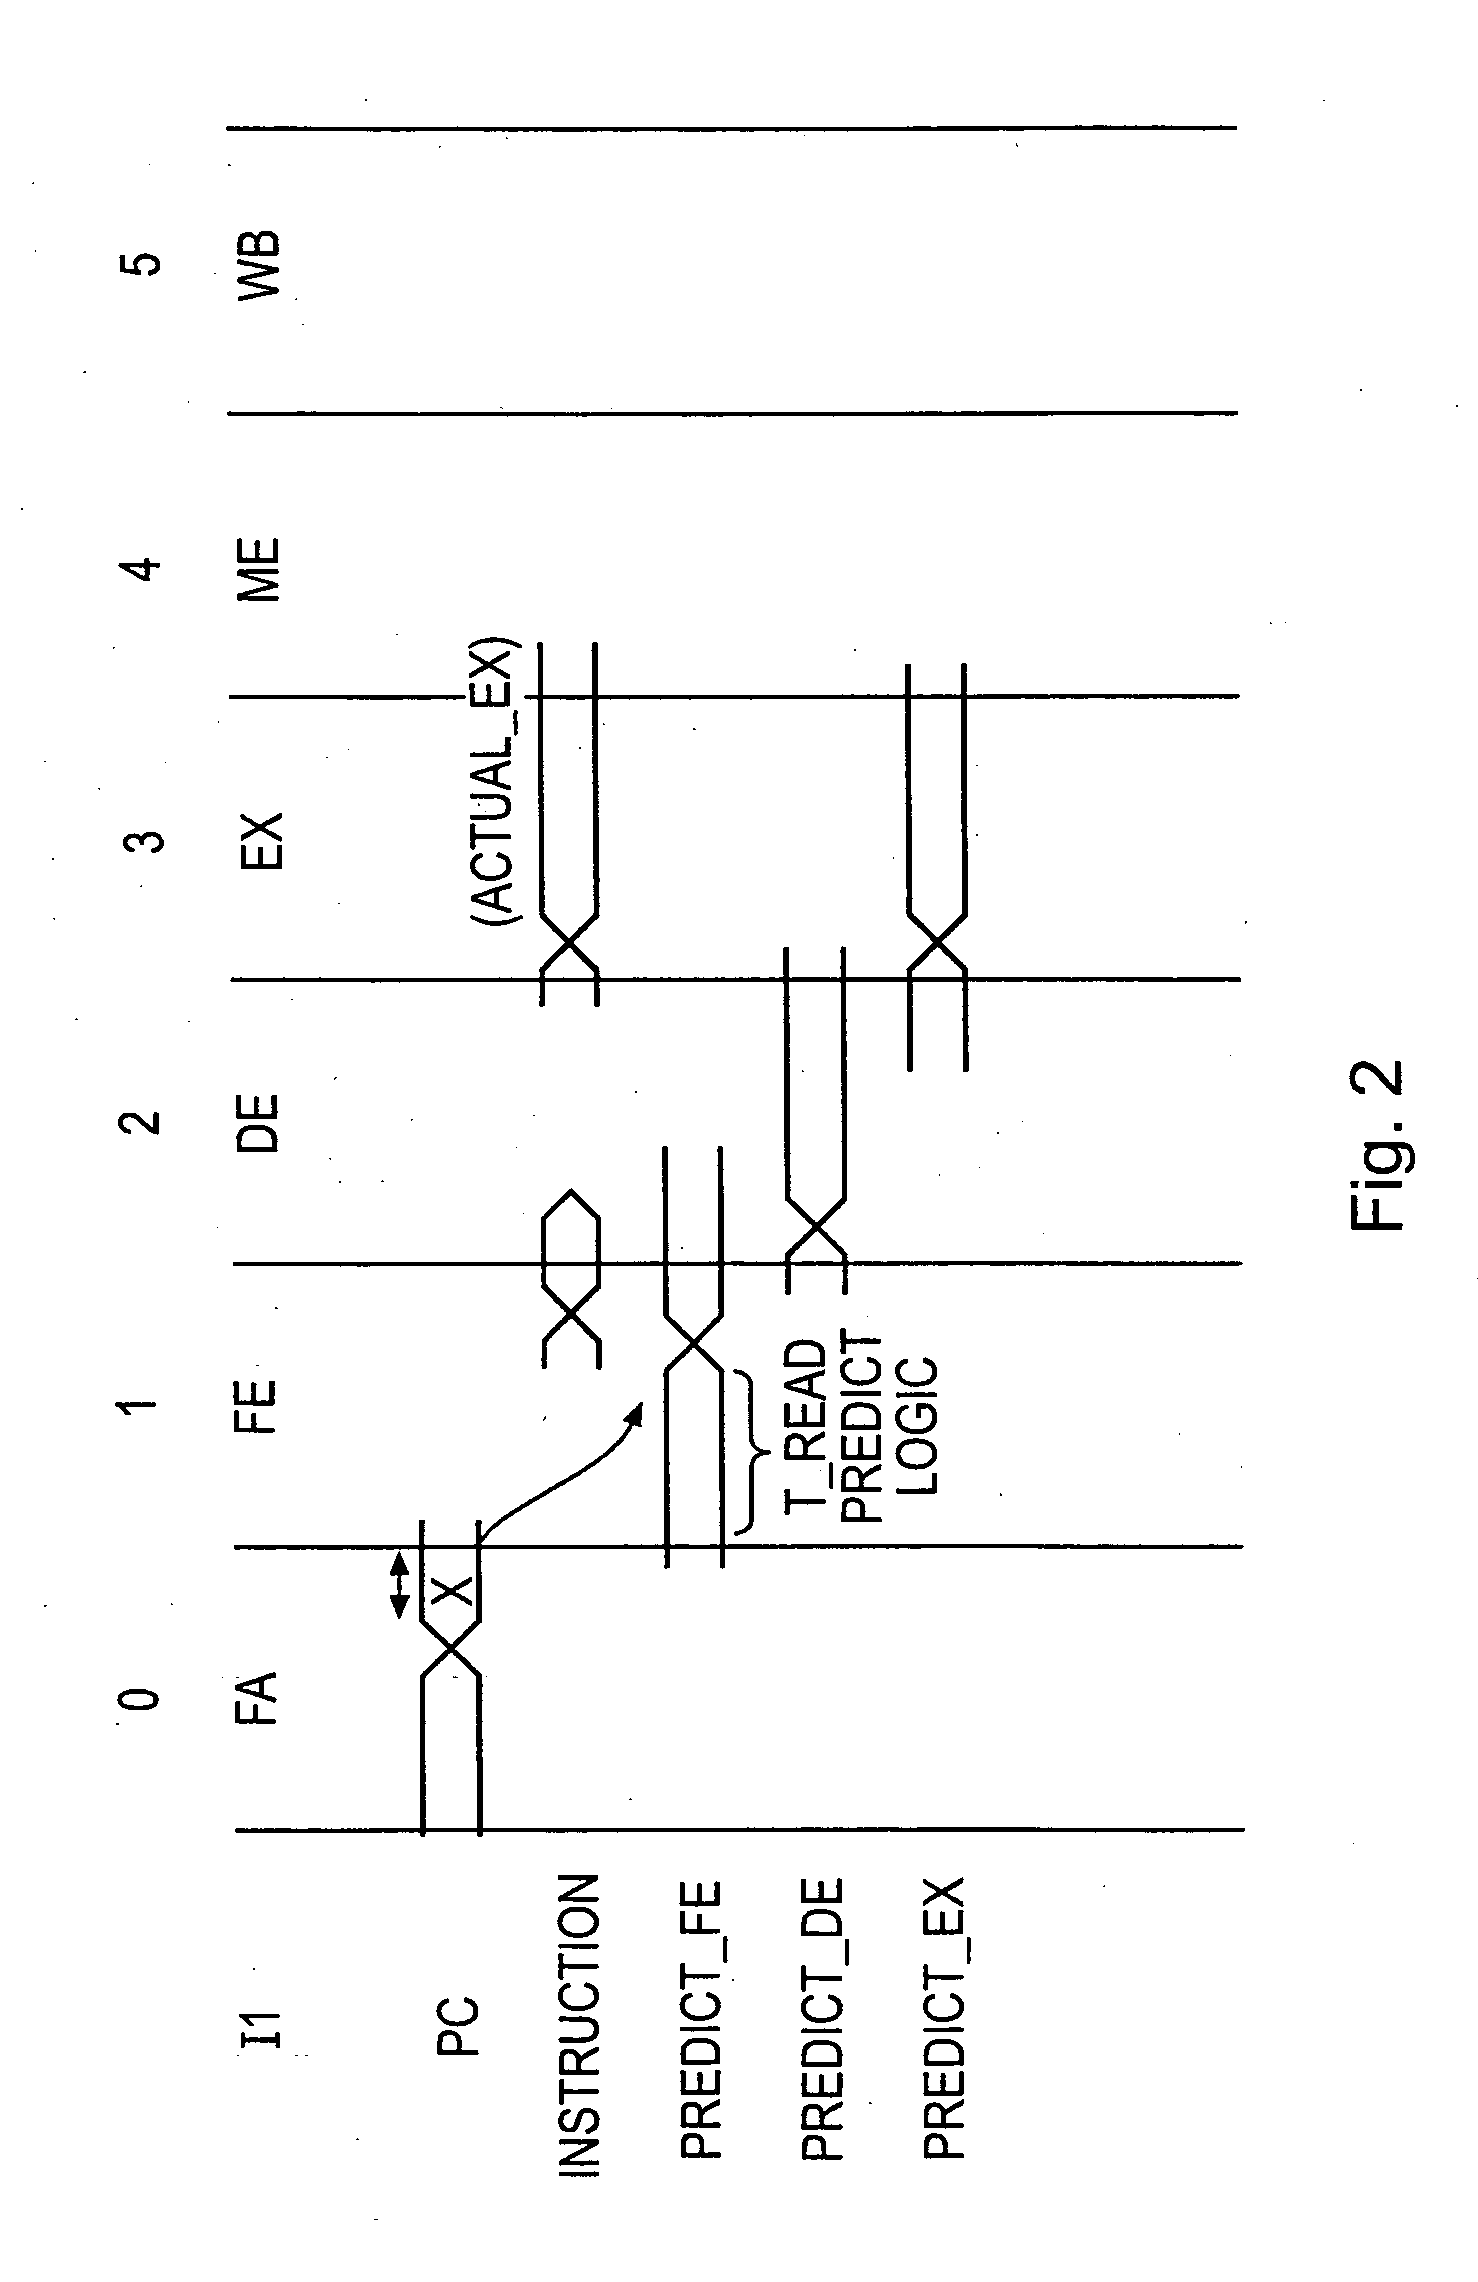 Control of metastability in the pipelined data processing apparatus